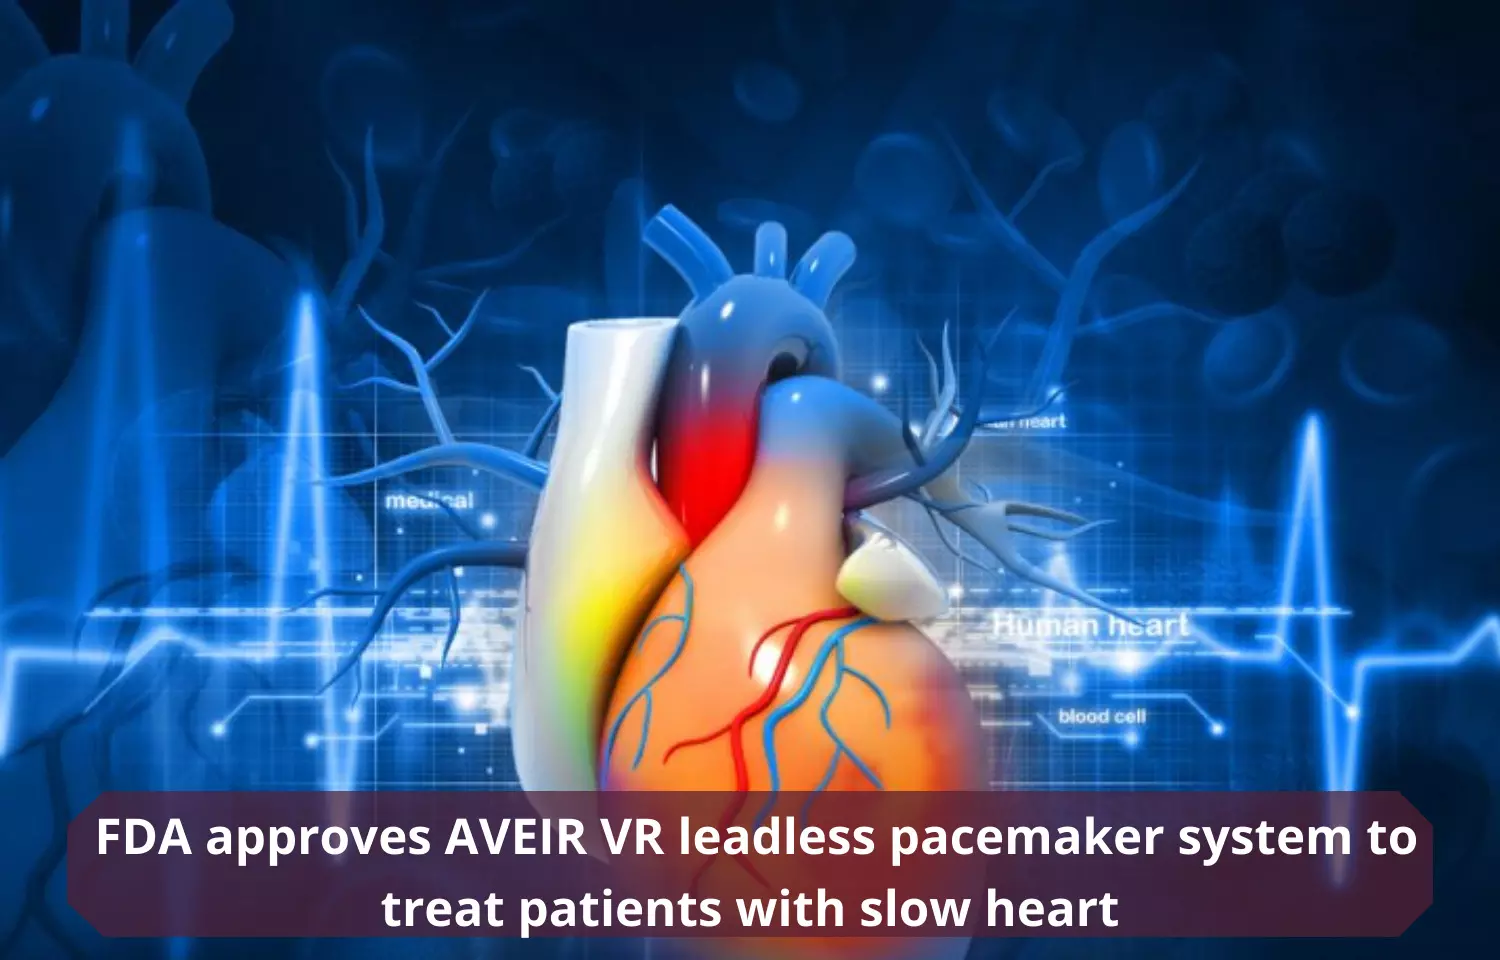 Journal Club - FDA approves AVEIR VR leadless pacemaker system to treat patients with slow heart